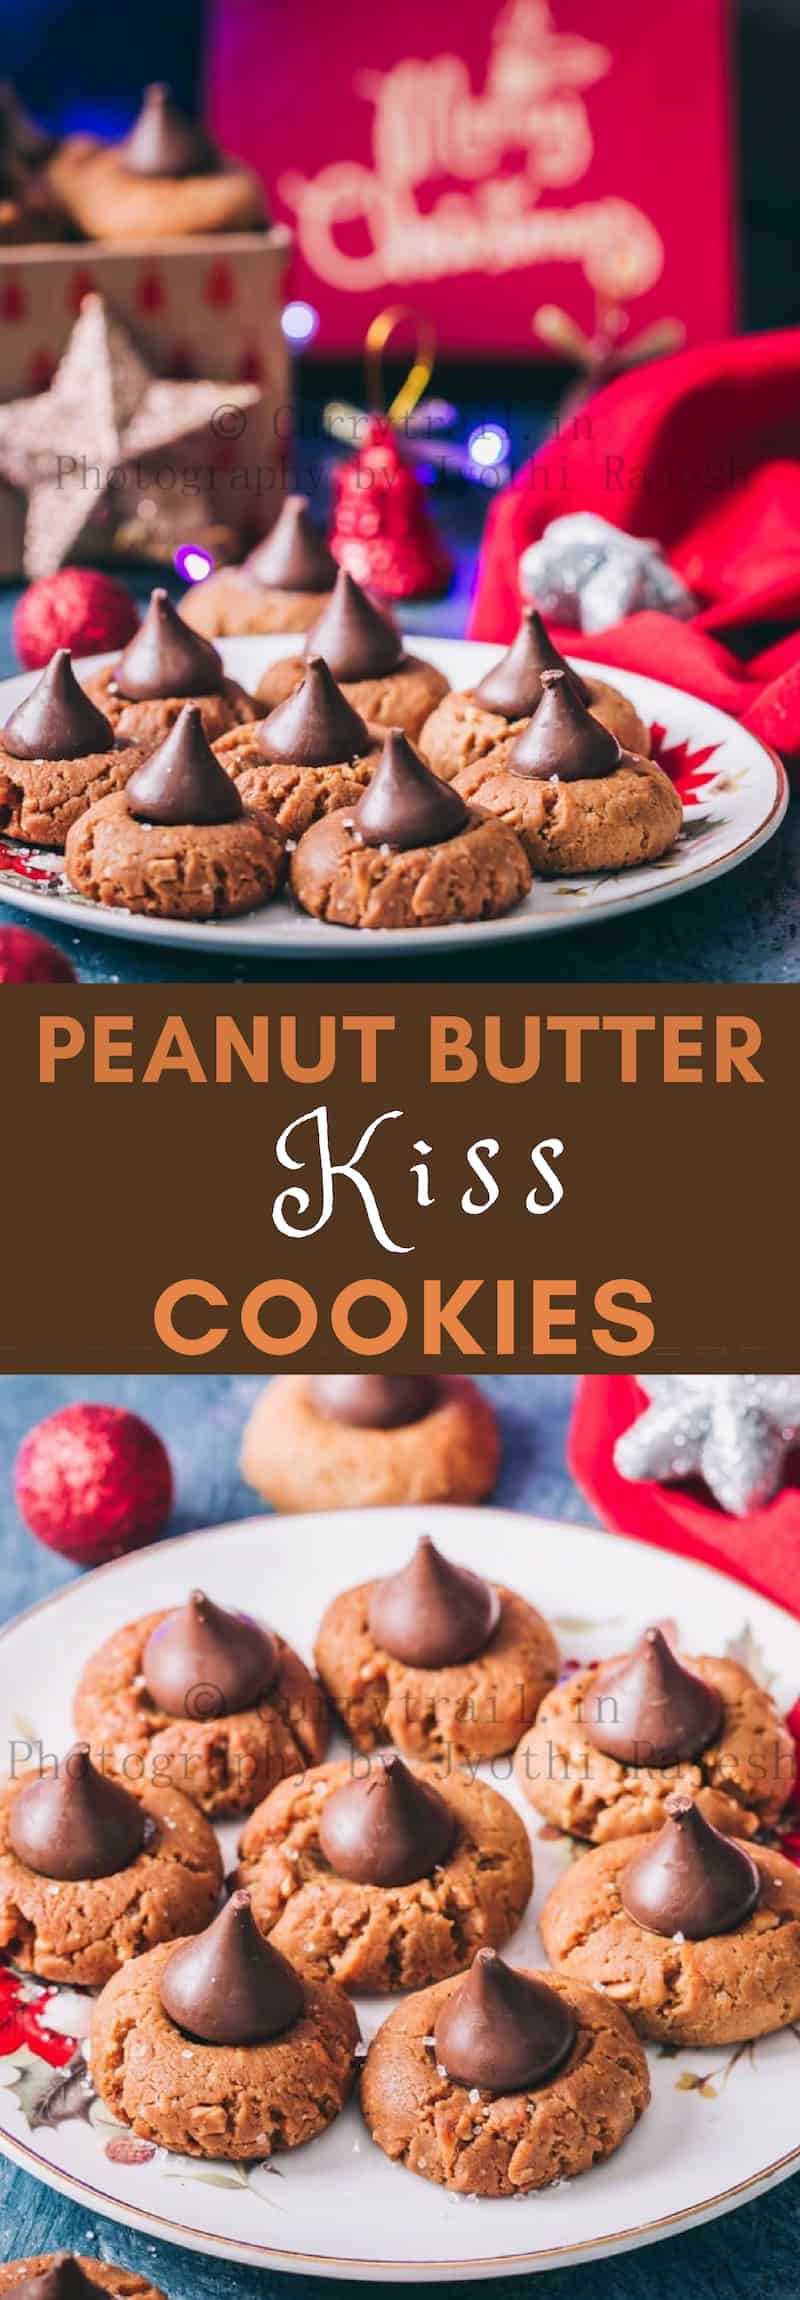 peanut butter kiss cookies are soft chewy cookies that's great for cookie exchange during the holidays. Soft cookies made of peanut butter and topped with chocolate kiss candy at the center is a classic holiday cookie